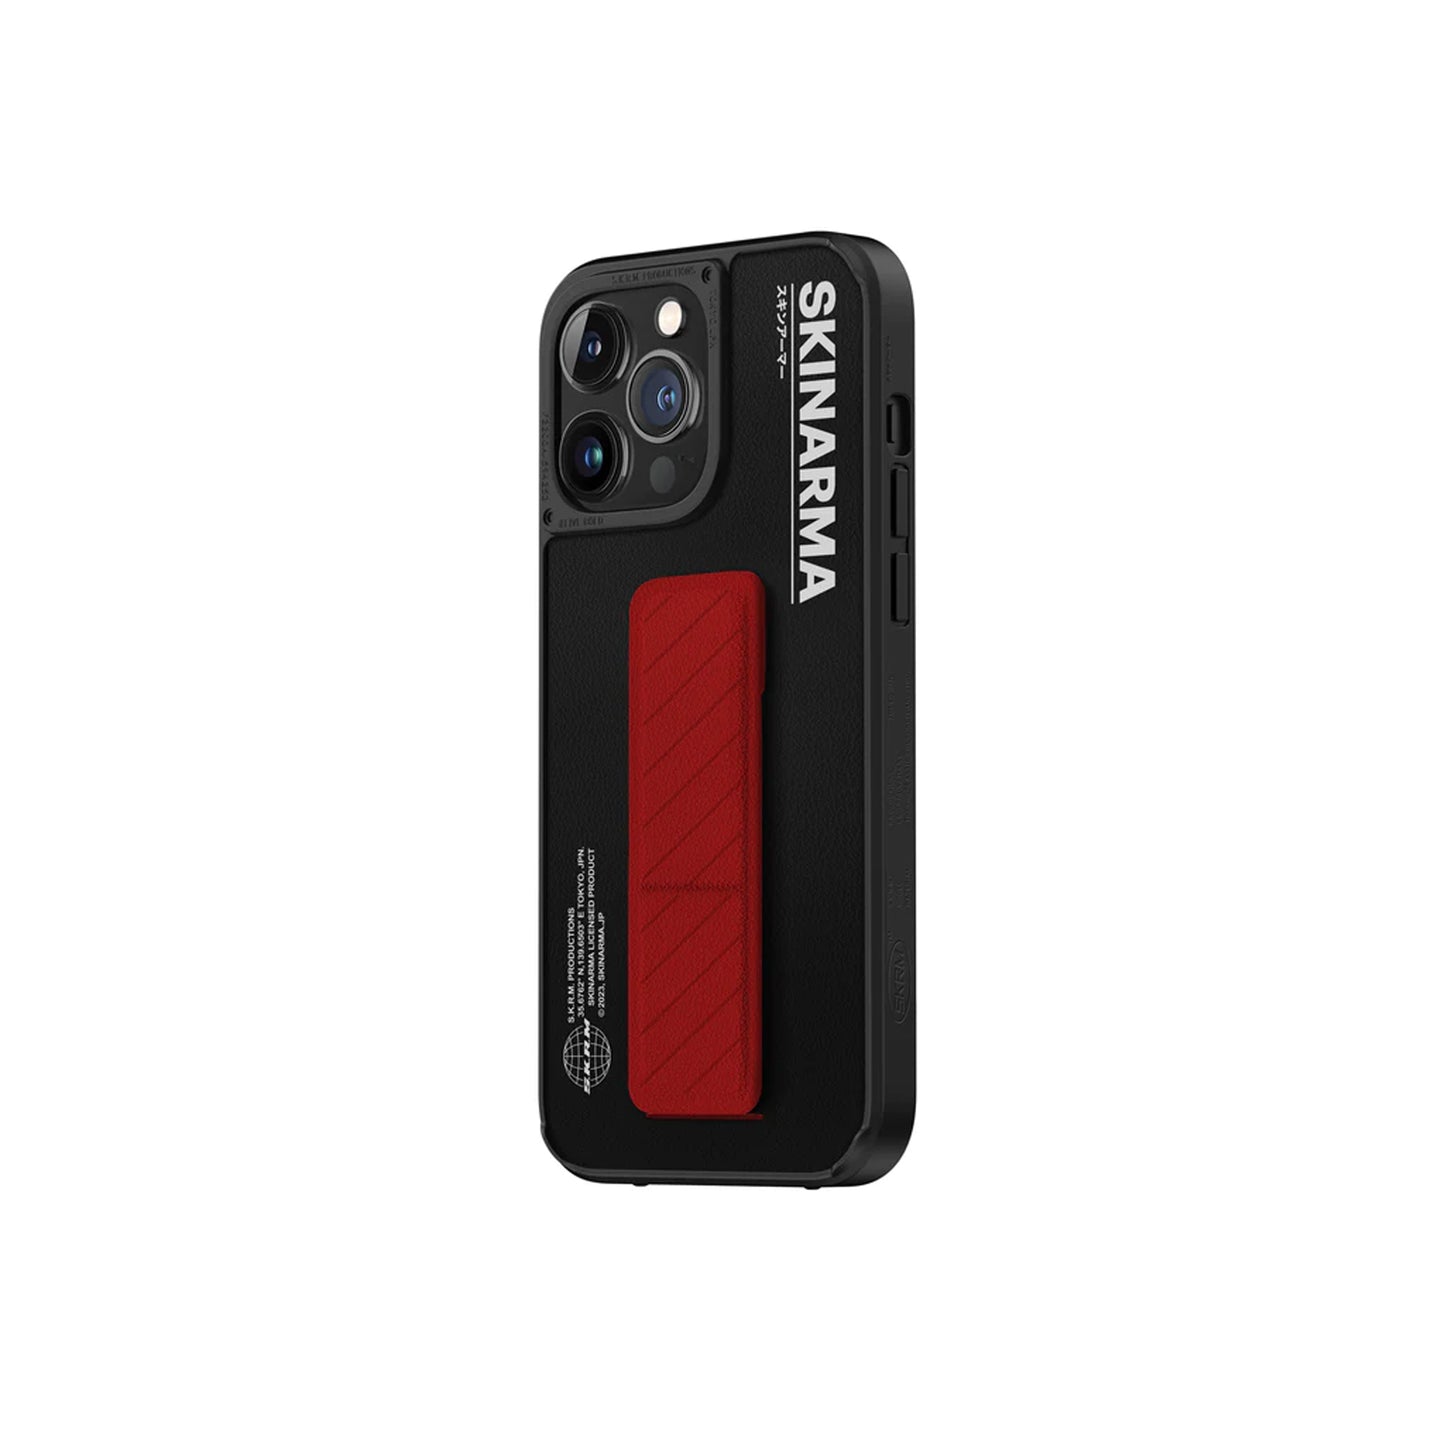 [ONLINE ONLY] Skinarma Gyo for iPhone 14 Pro Max - Black ( Barcode: 8886461242904 )